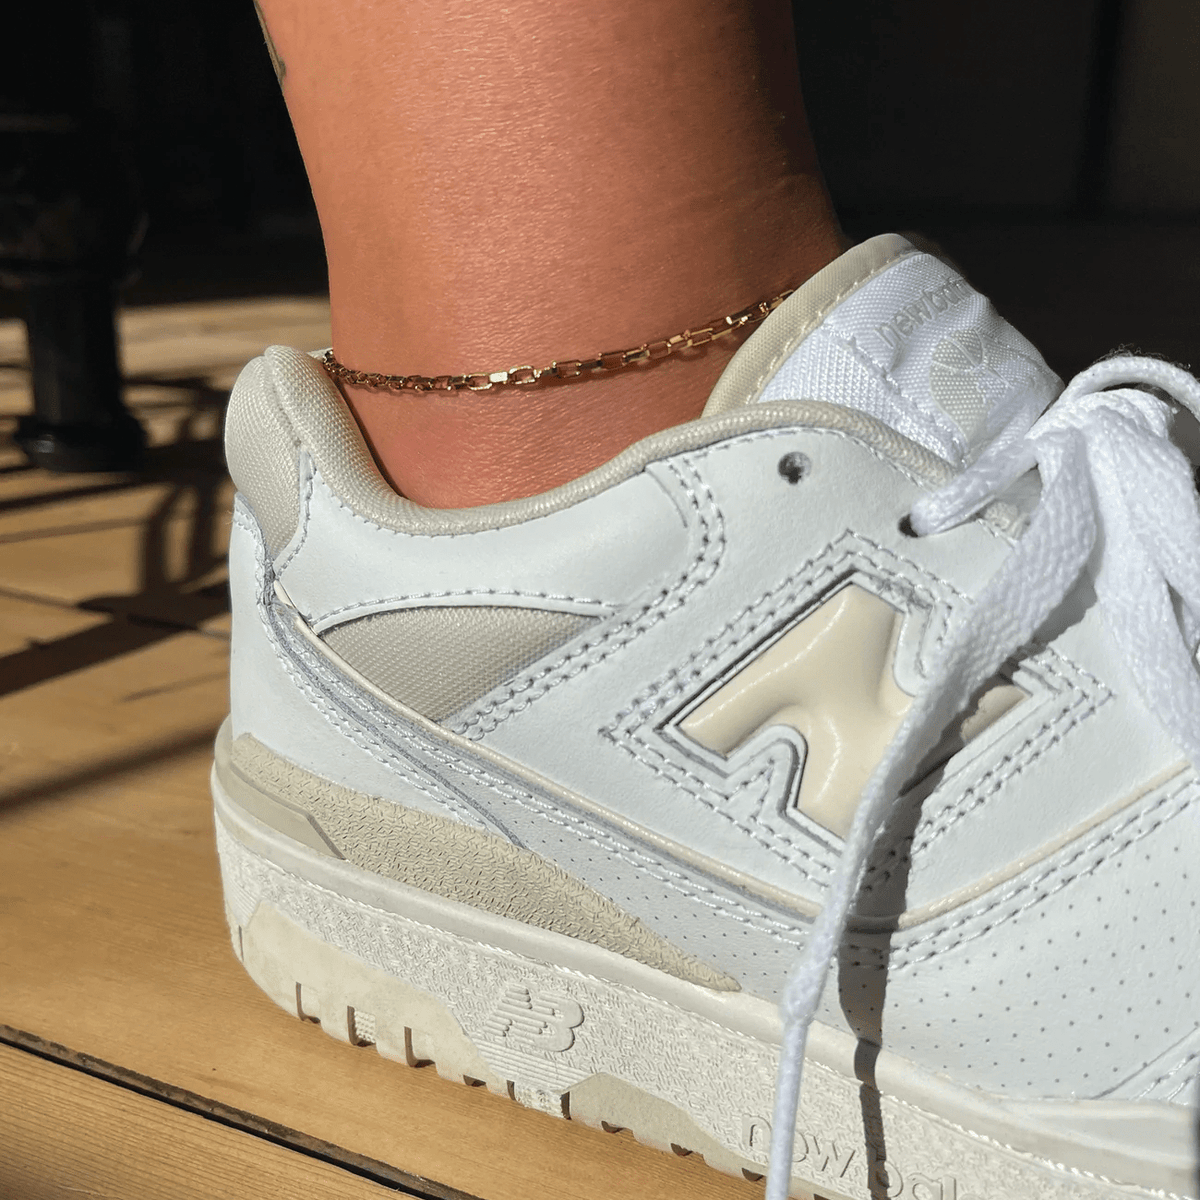 BohoMoon Stainless Steel Cubix Anklet Gold